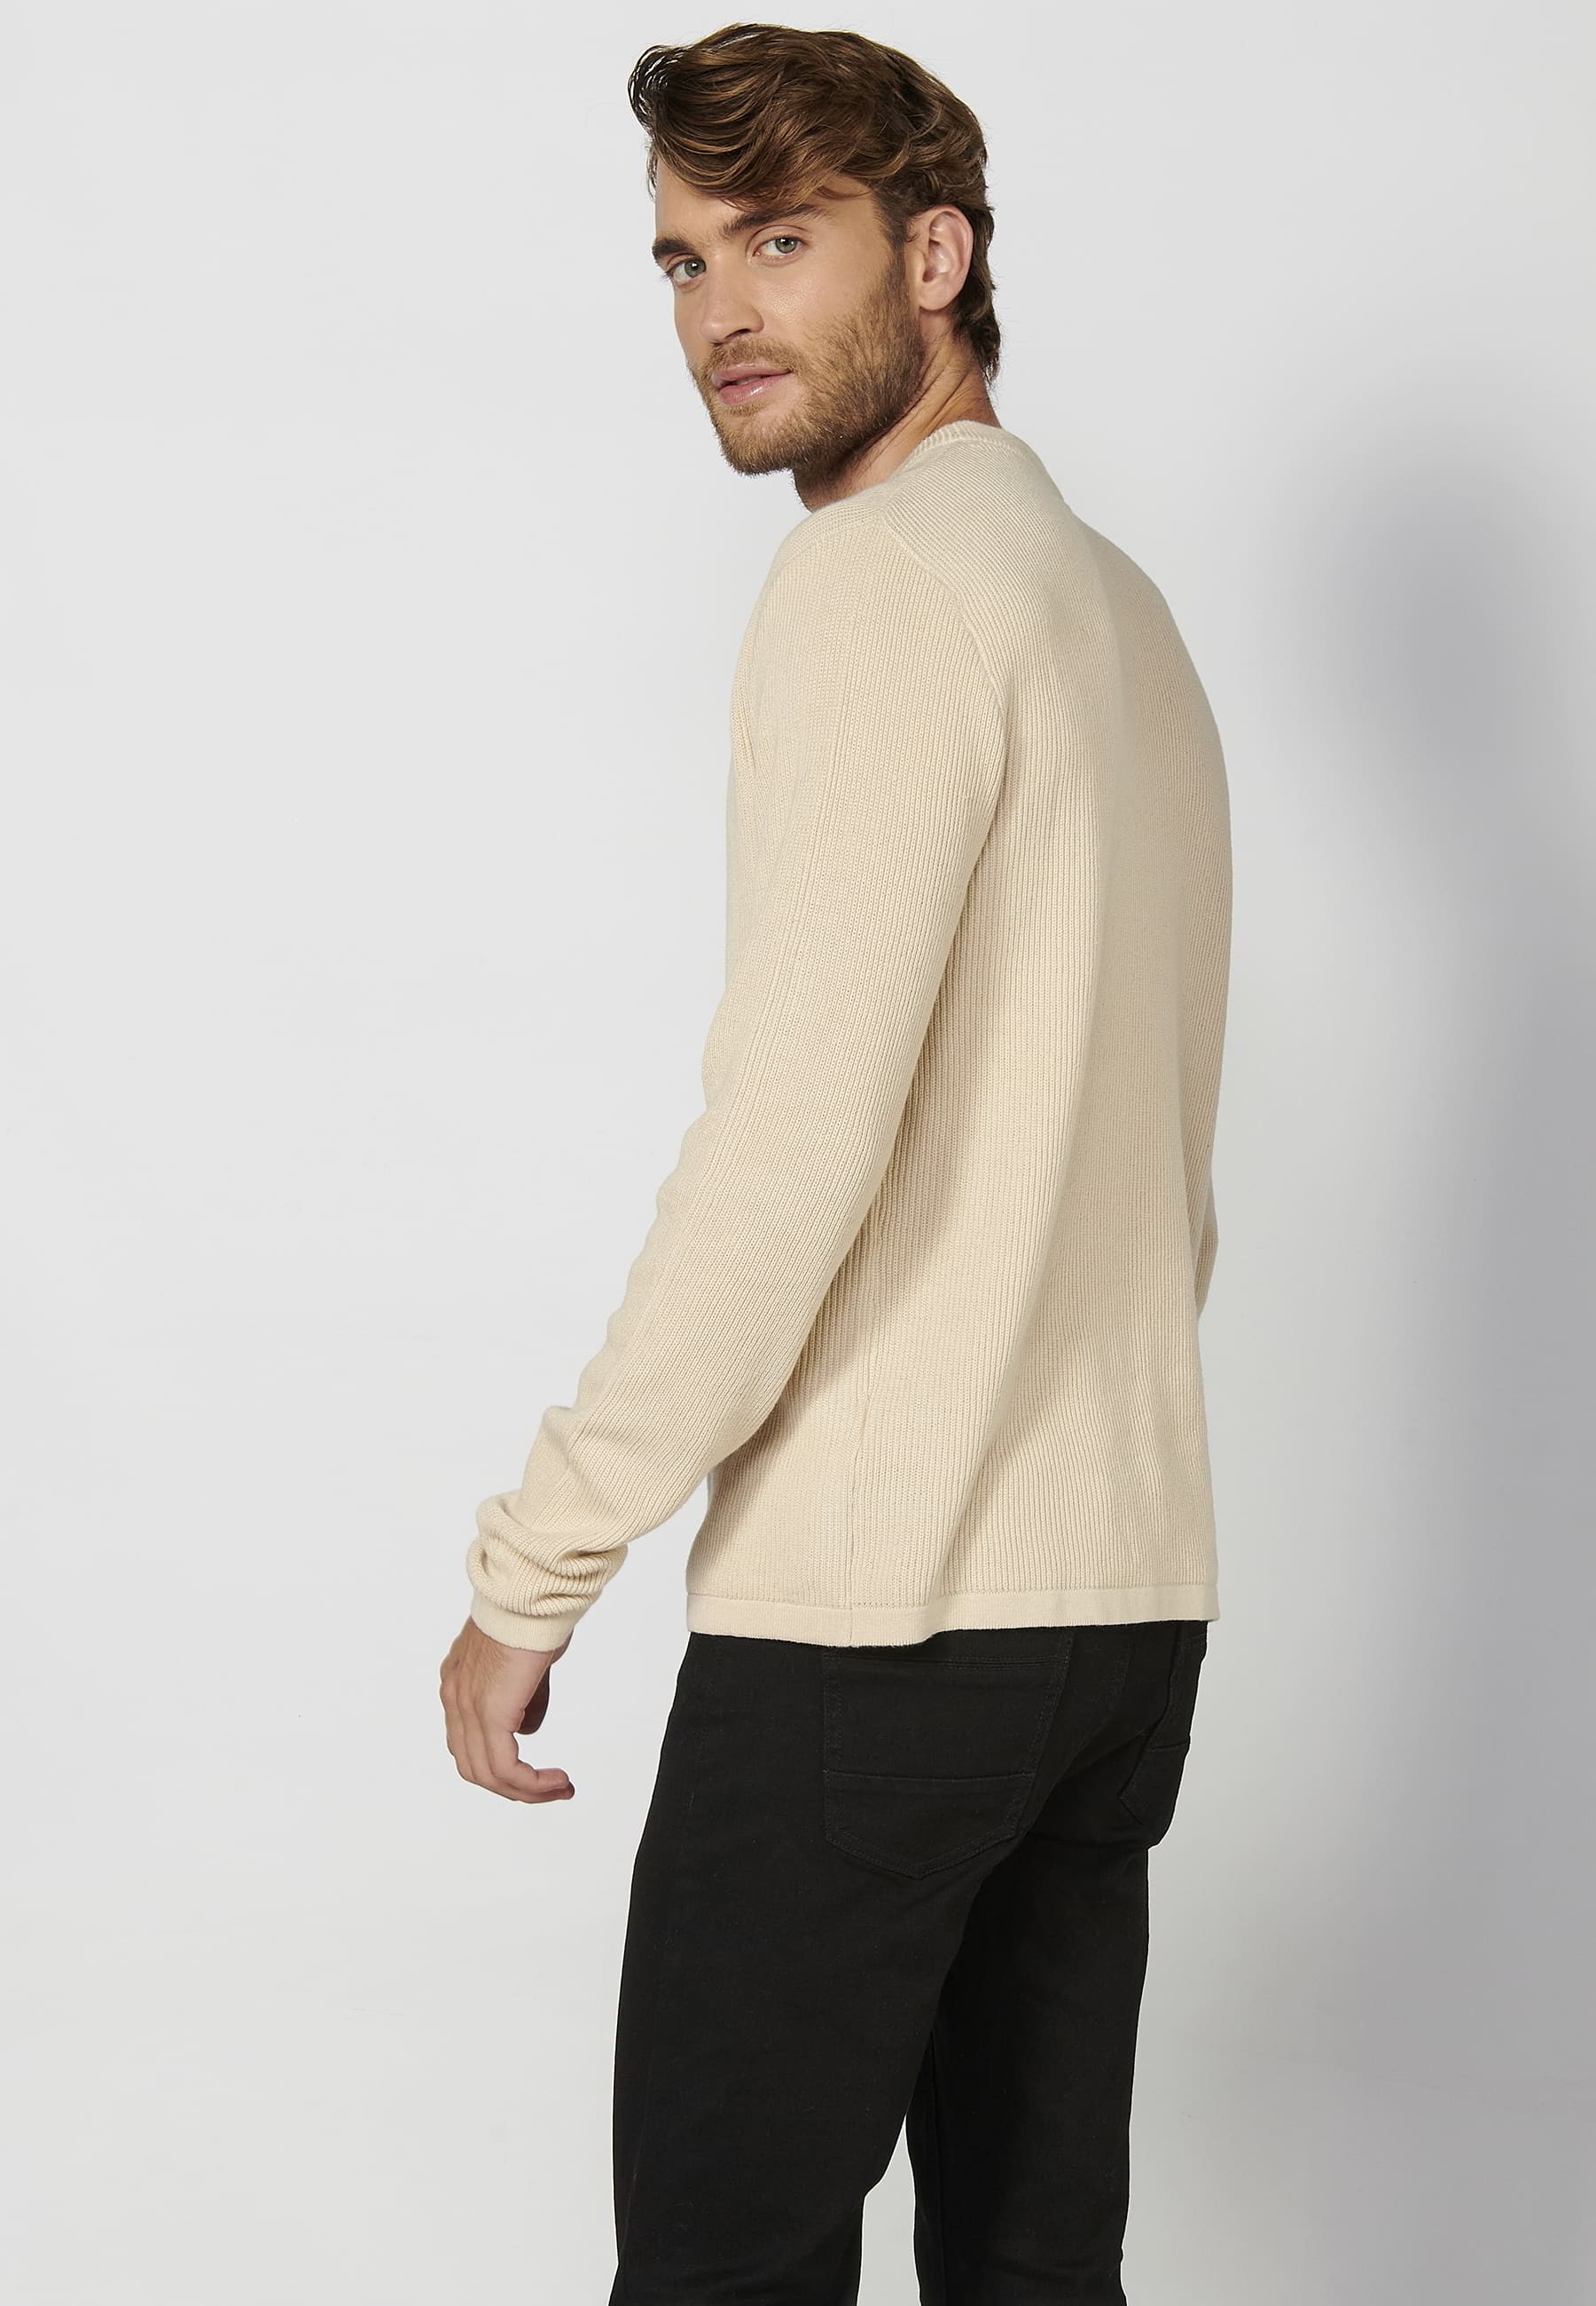 Long-sleeved cotton tricot sweater with embroidered detail in Cream color for Men 4